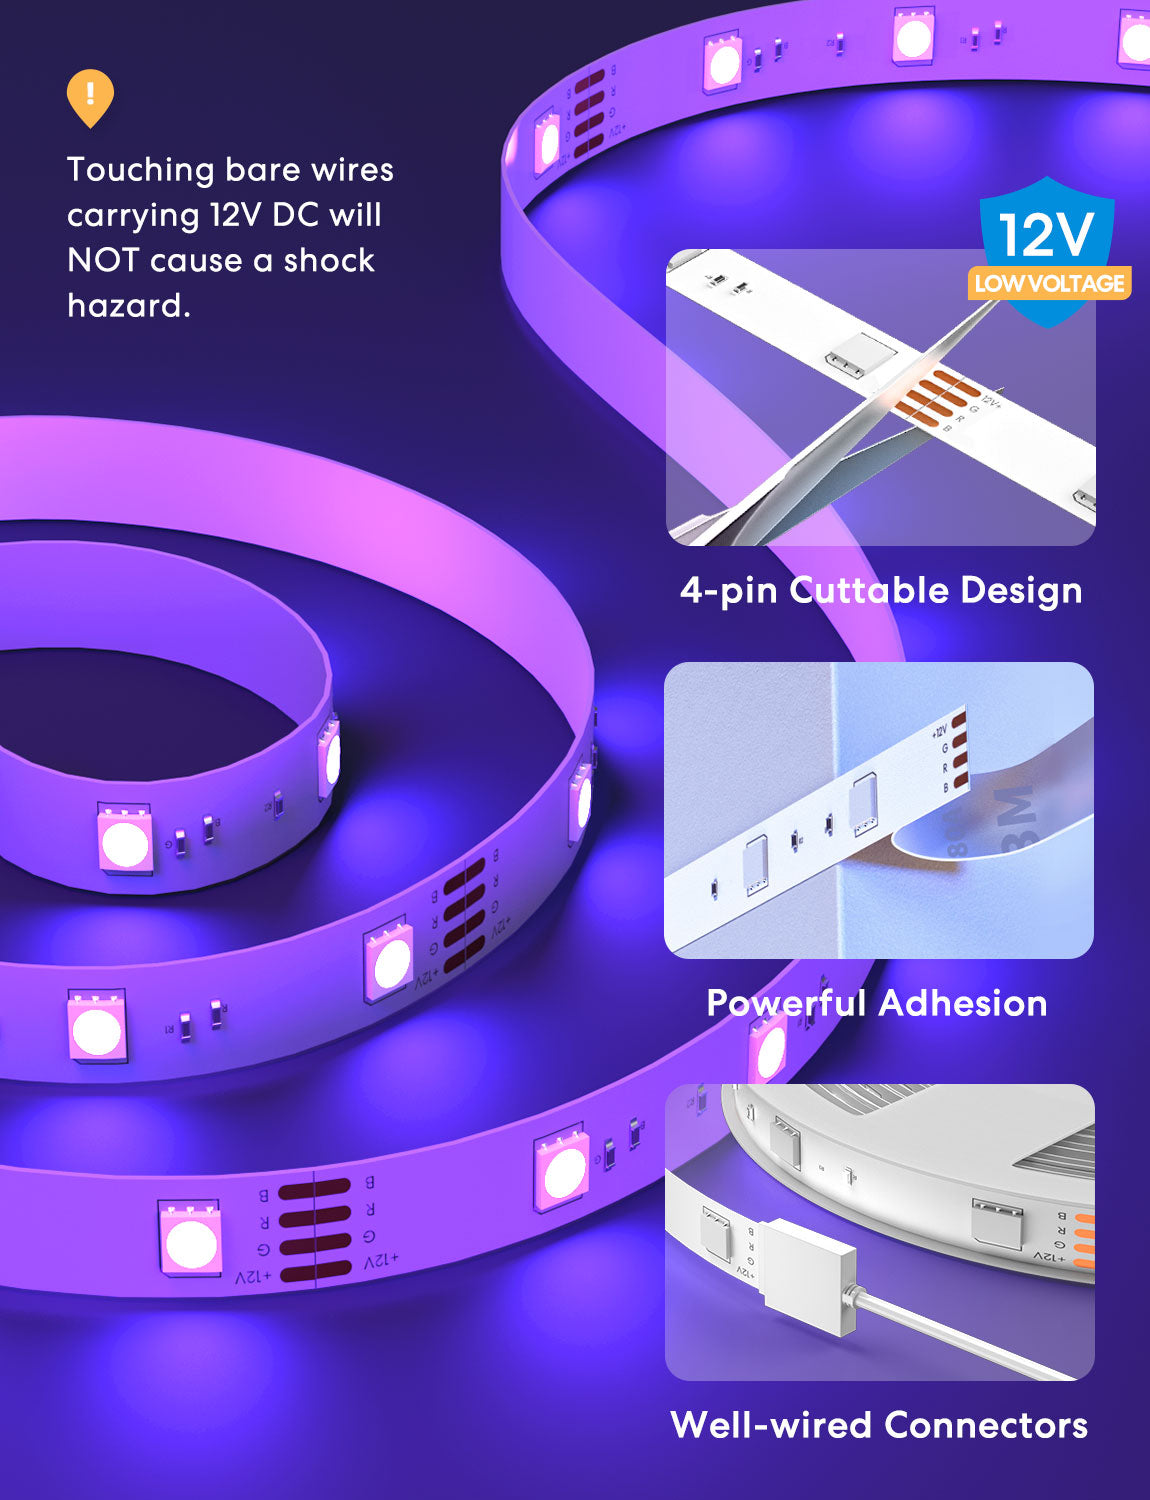 Govee LED Strip Lights, 32.8FT RGB LED Lights with Remote Control